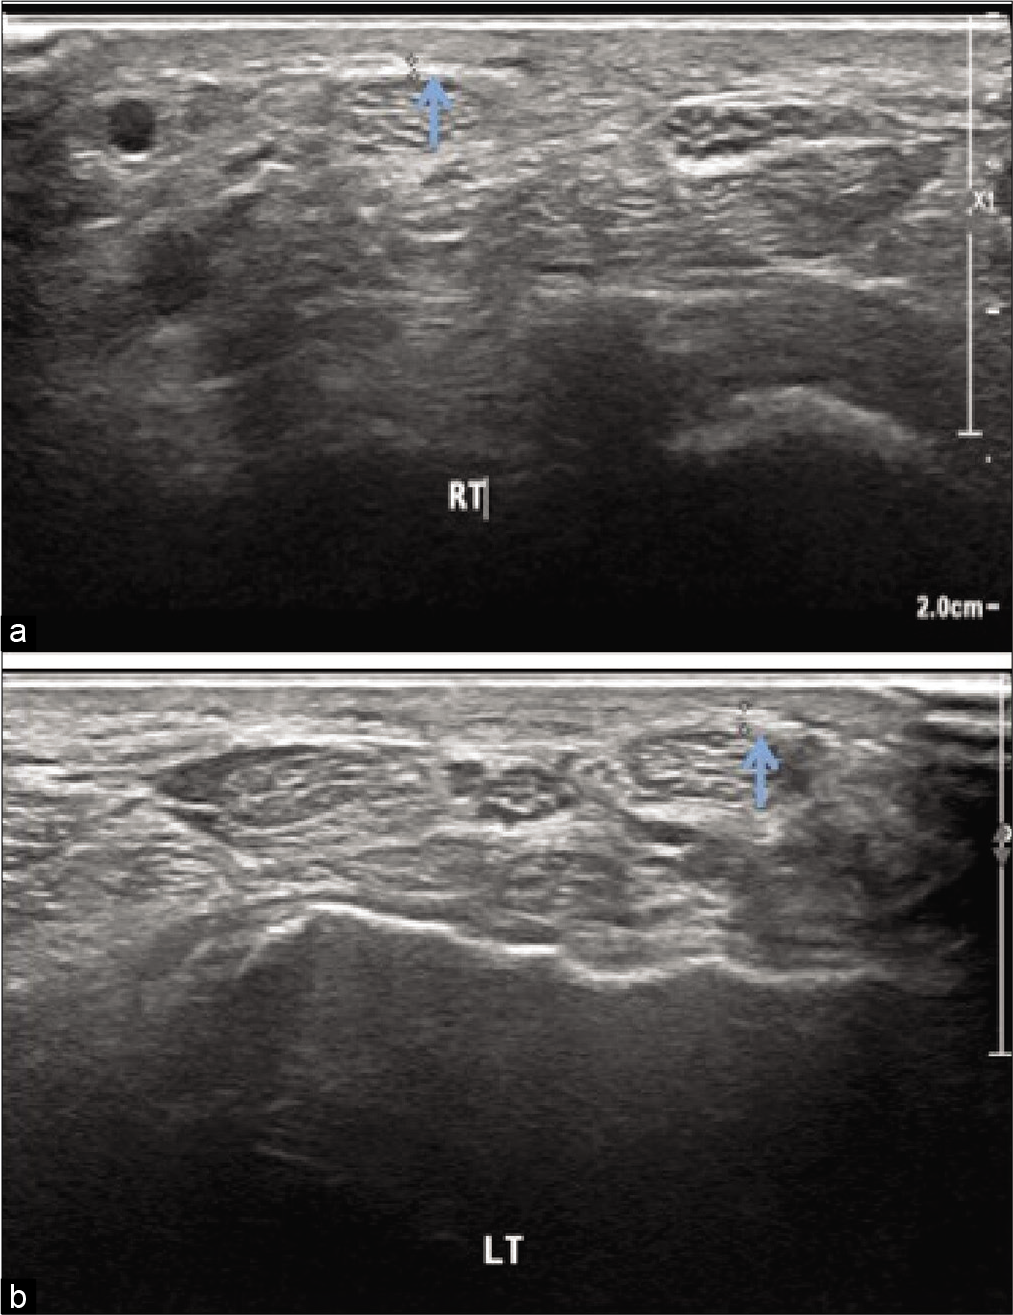 Ultrasonography image of the flexor retinaculum of hypothyroidism patient showing (a) thickness 0.07 cm on right side(arrow) and (b) 0.052 cm on left side(arrow).